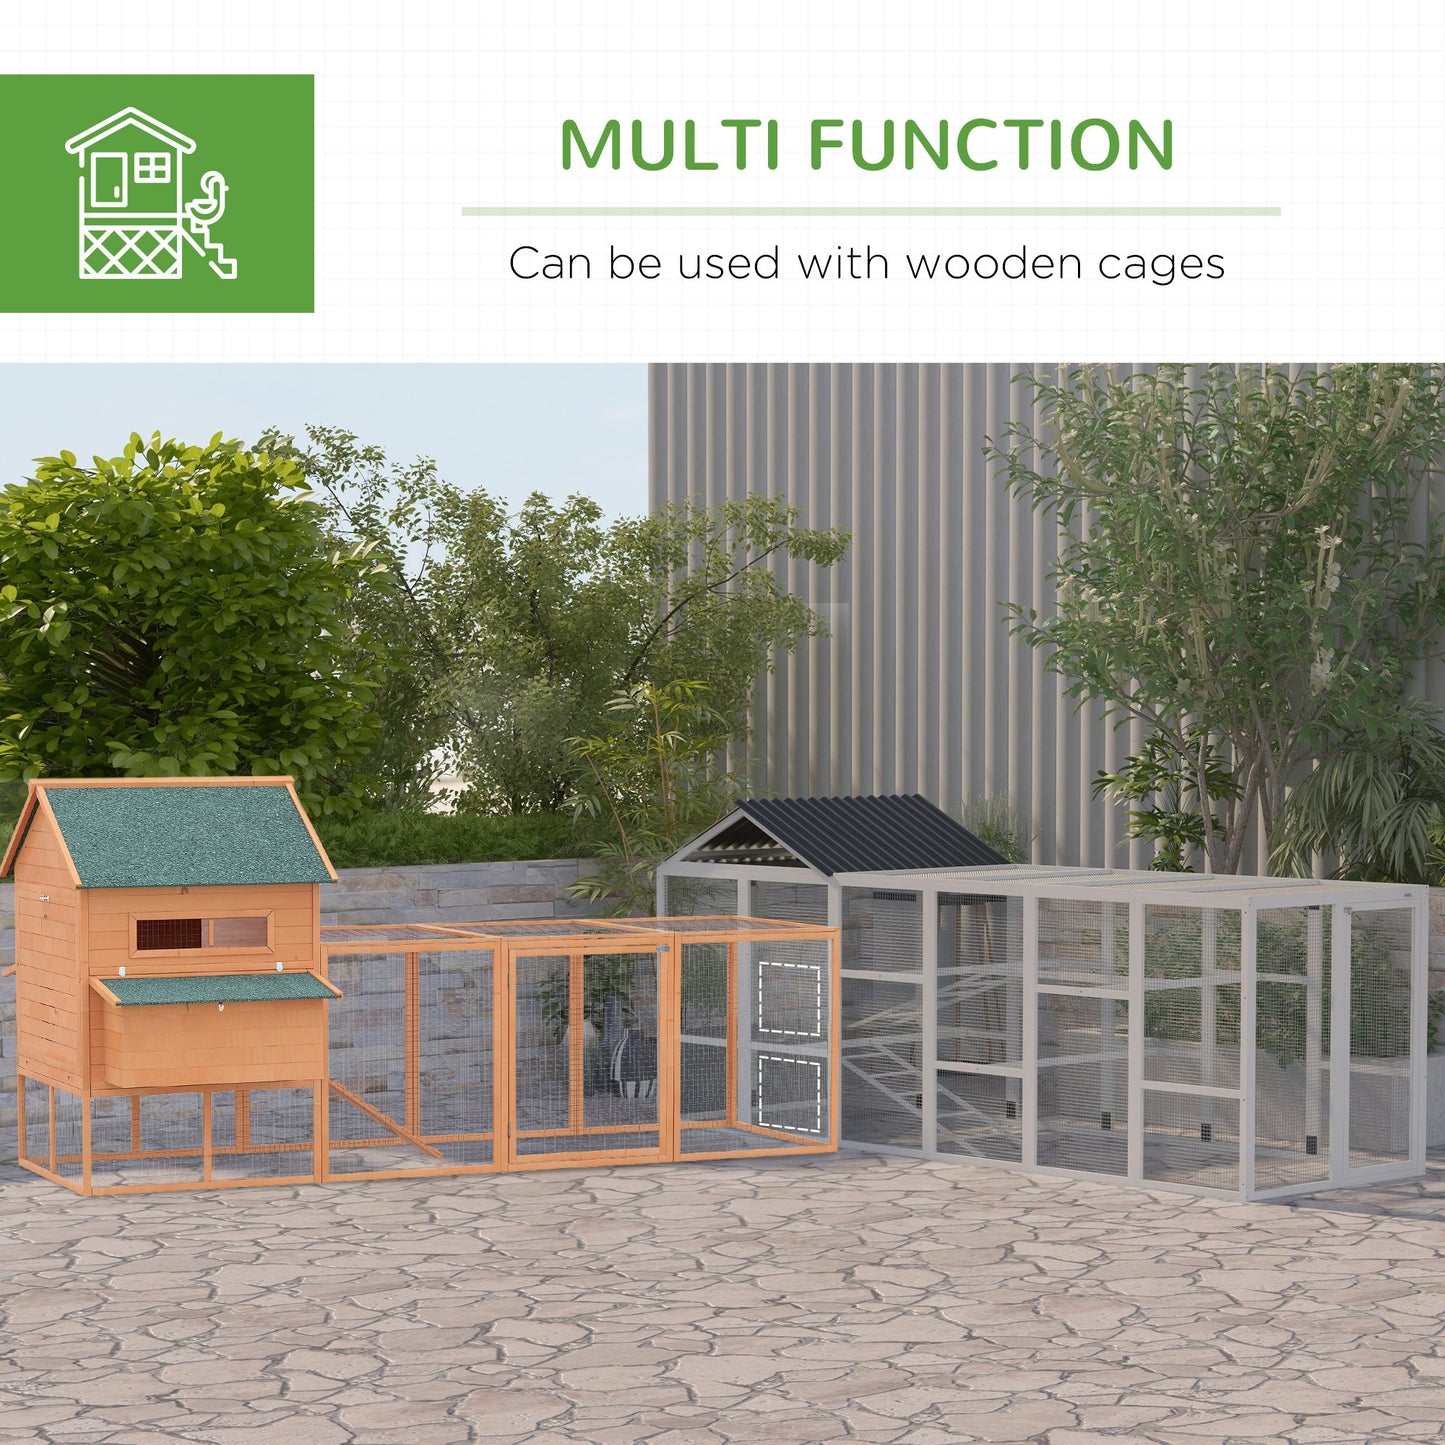 Miscellaneous-Wooden Chicken Coop Run for 6-10 Chickens, Hen House with Storage, Perches, 49" x 48" x 12.5", Gray - Outdoor Style Company